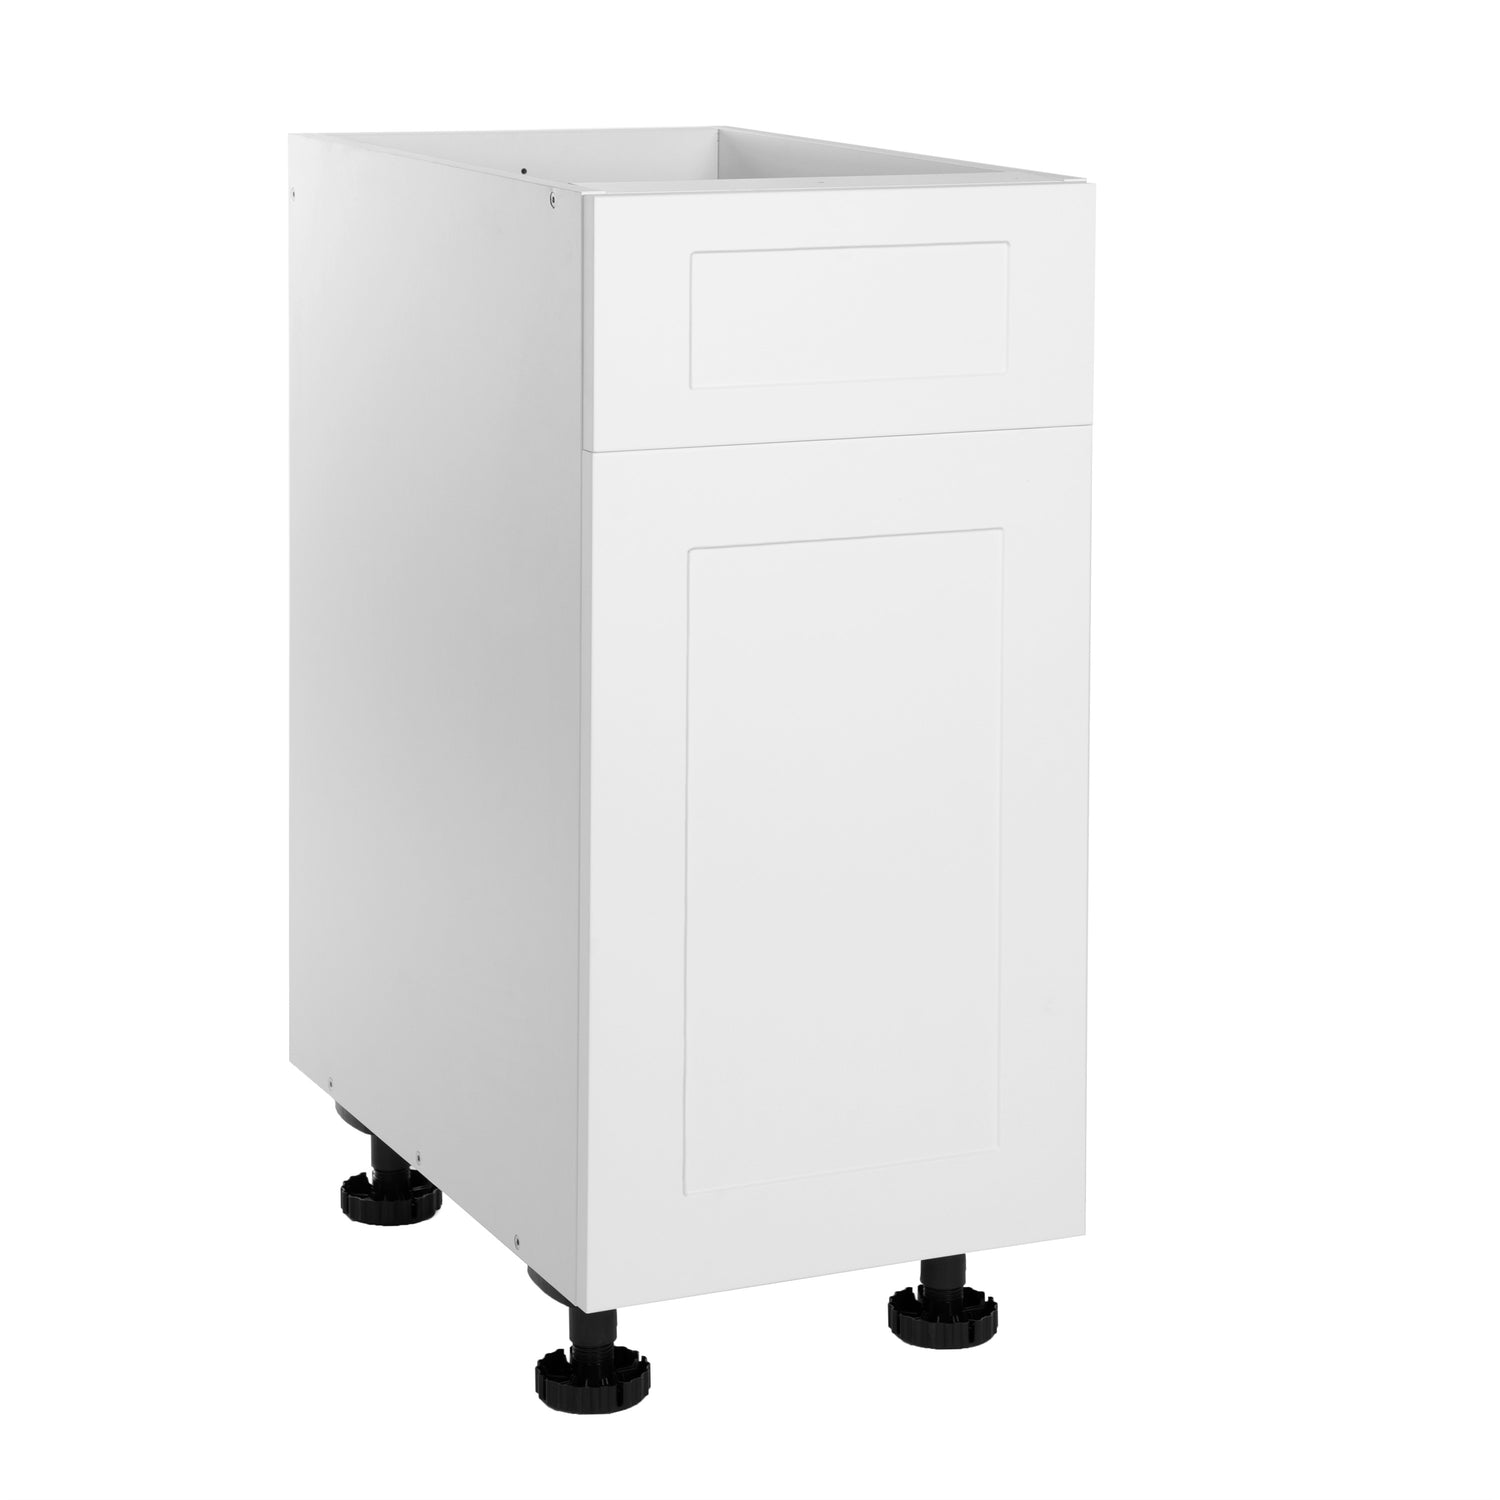 Quick Assemble Modern Style with Soft Close, White Shaker Base Kitchen Cabinet 1 Drawer (15 in W x 24 in D x 34.50 in H) -  Pro-Edge HD